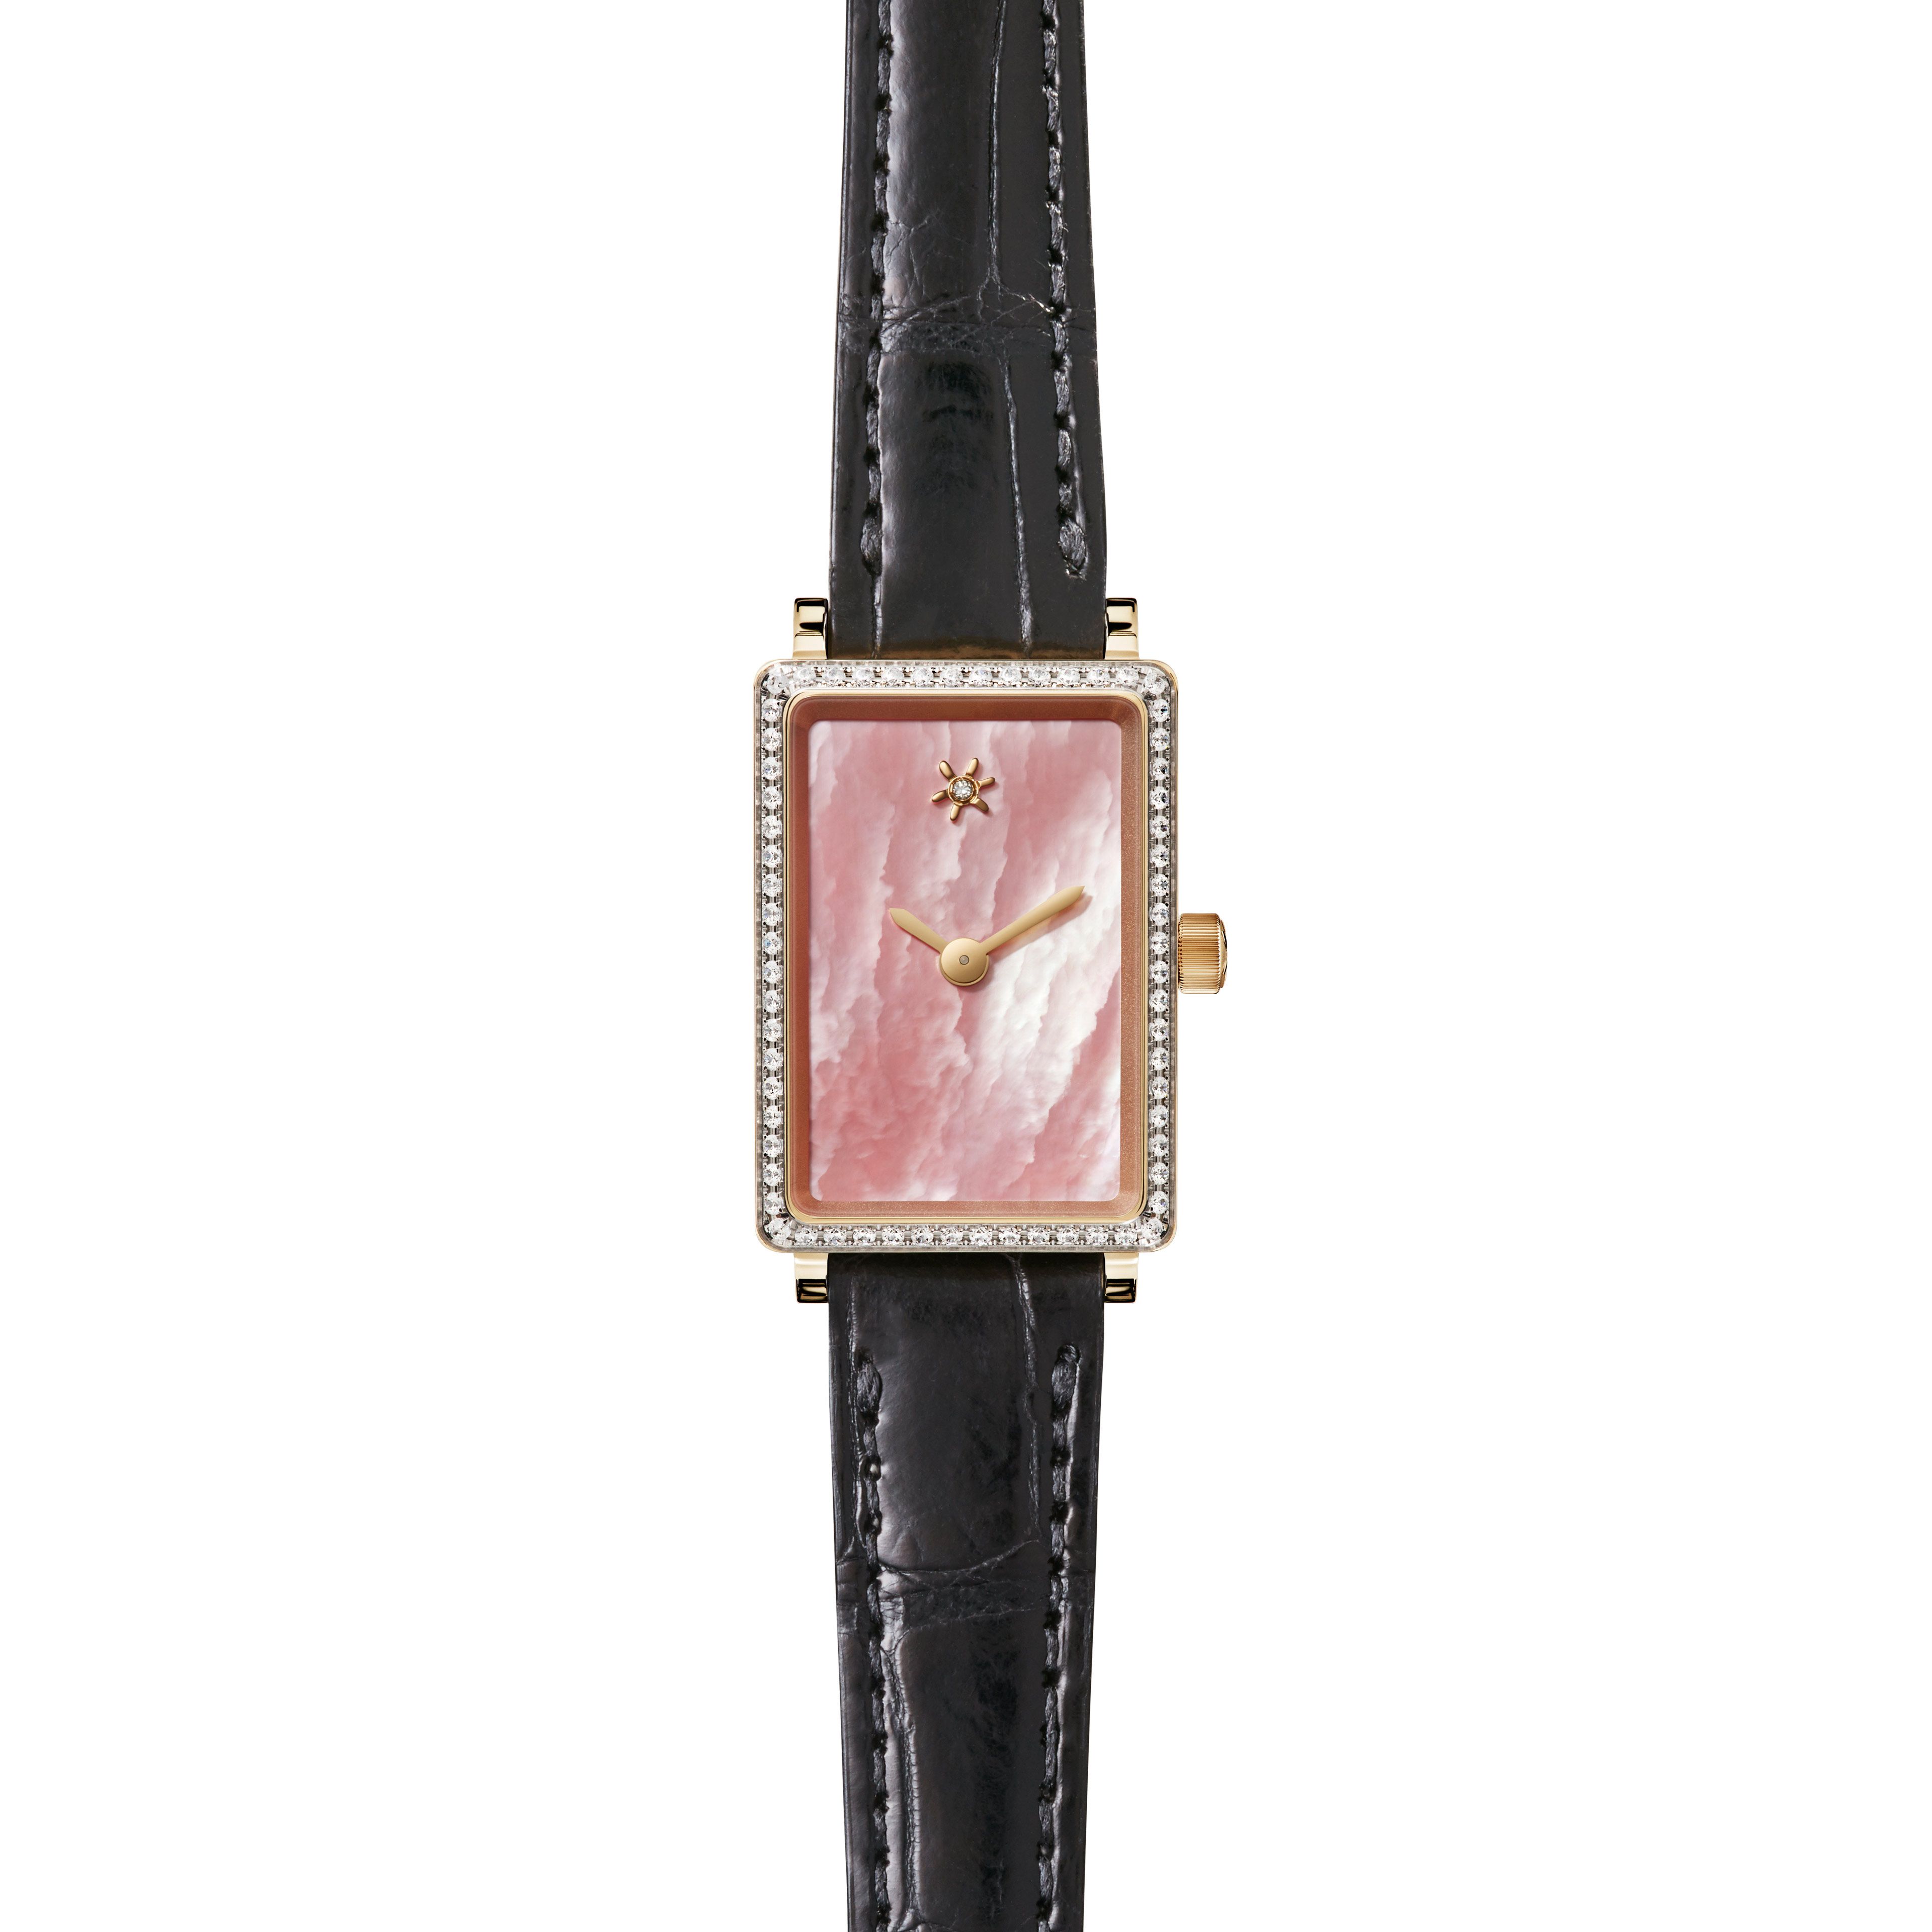 The Gomelsky Collection Shows the Feminine Side of Shinola